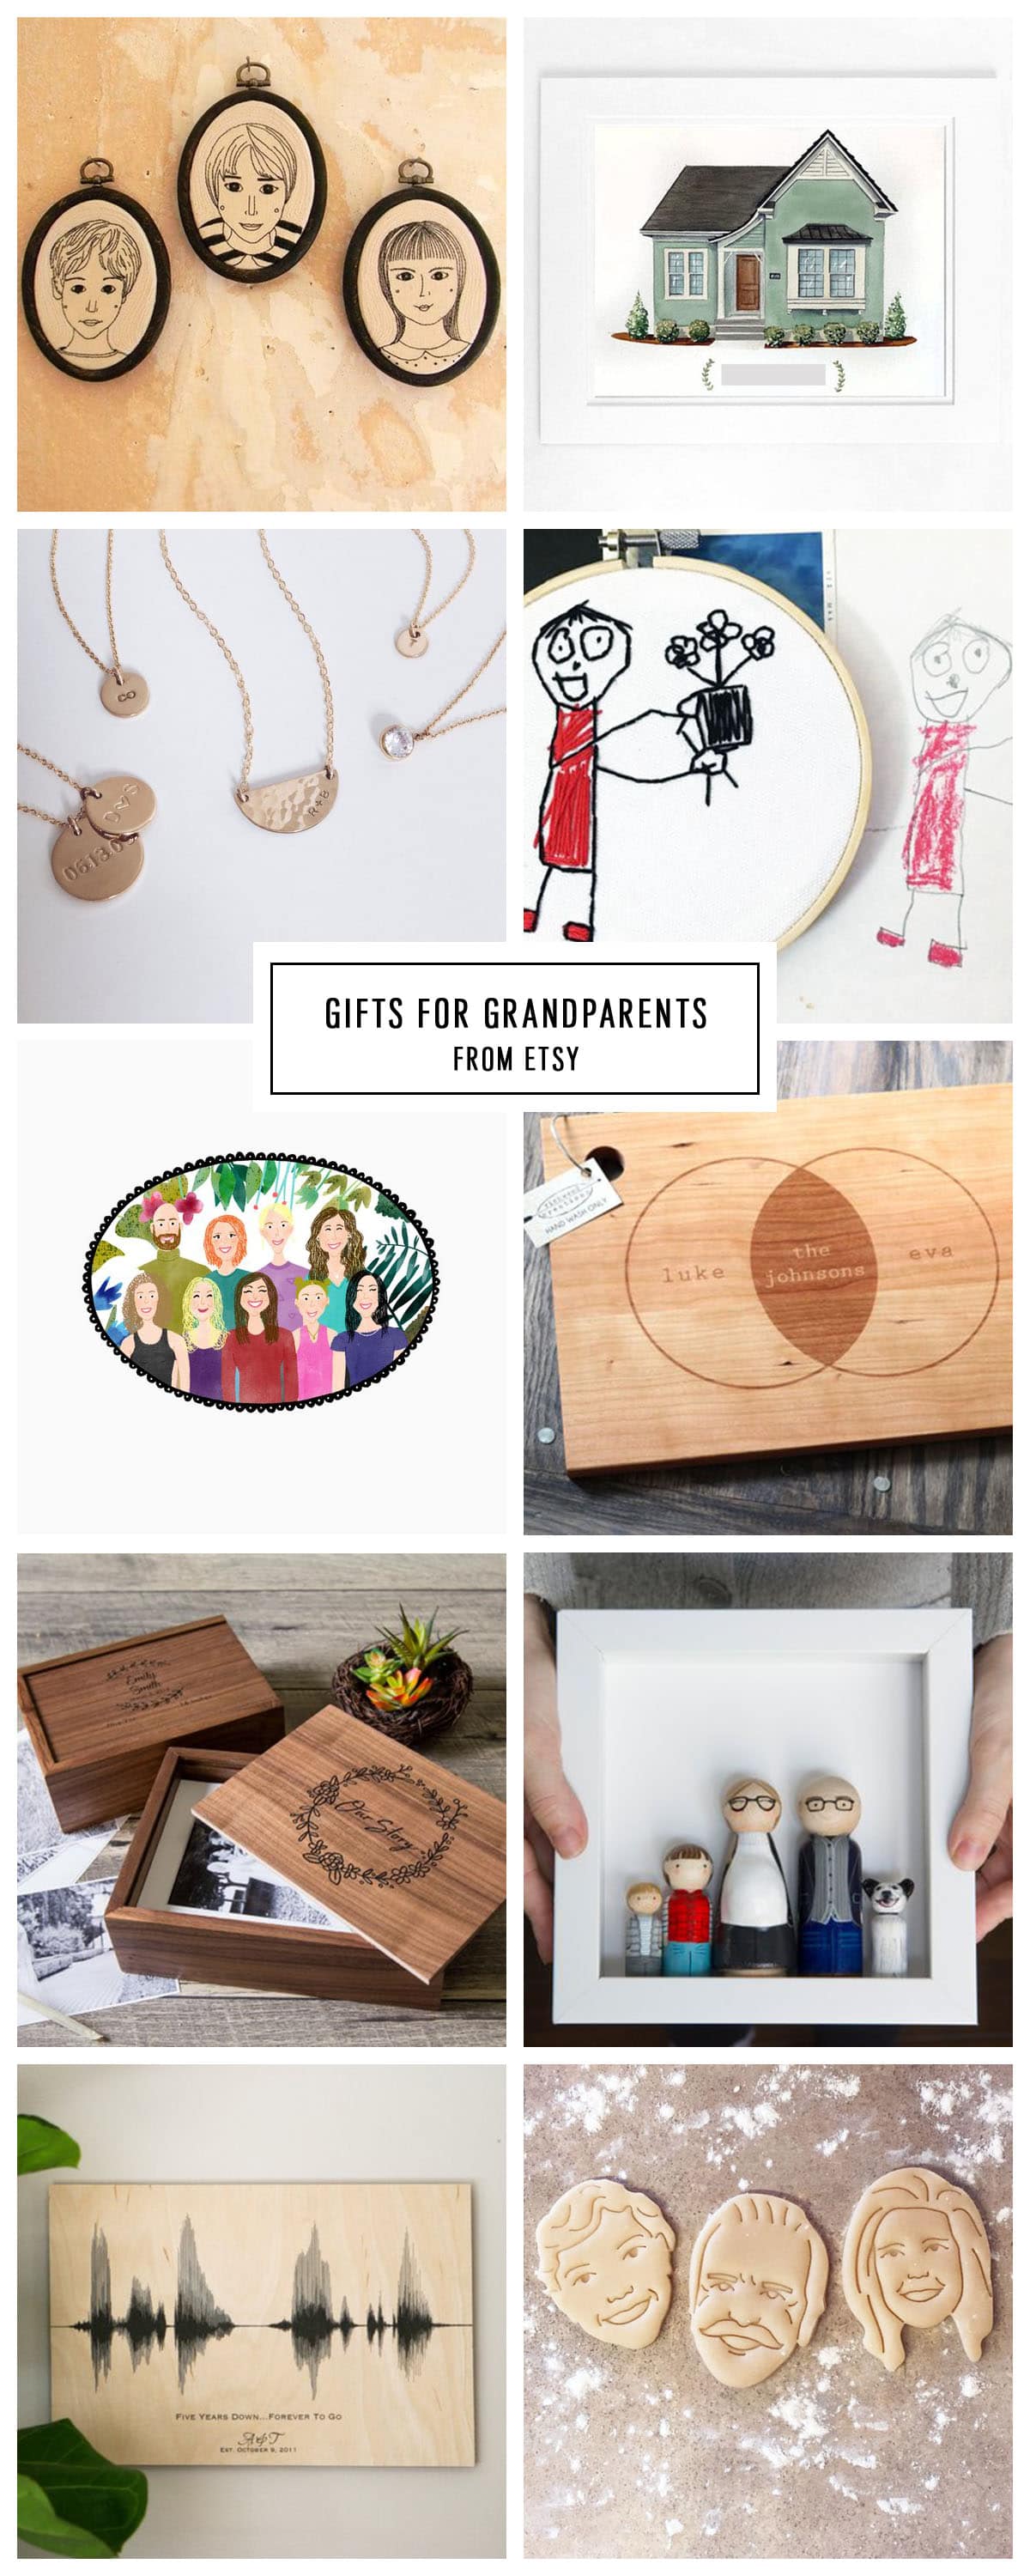 COMPLETE ETSY GIFT GUIDE FOR GRANDPARENTS UNDER $75 by Houston lifestyle blogger Ashley Rose of Sugar and Cloth -- #giftguide #christmas #entertaining #holidaygifts #presents